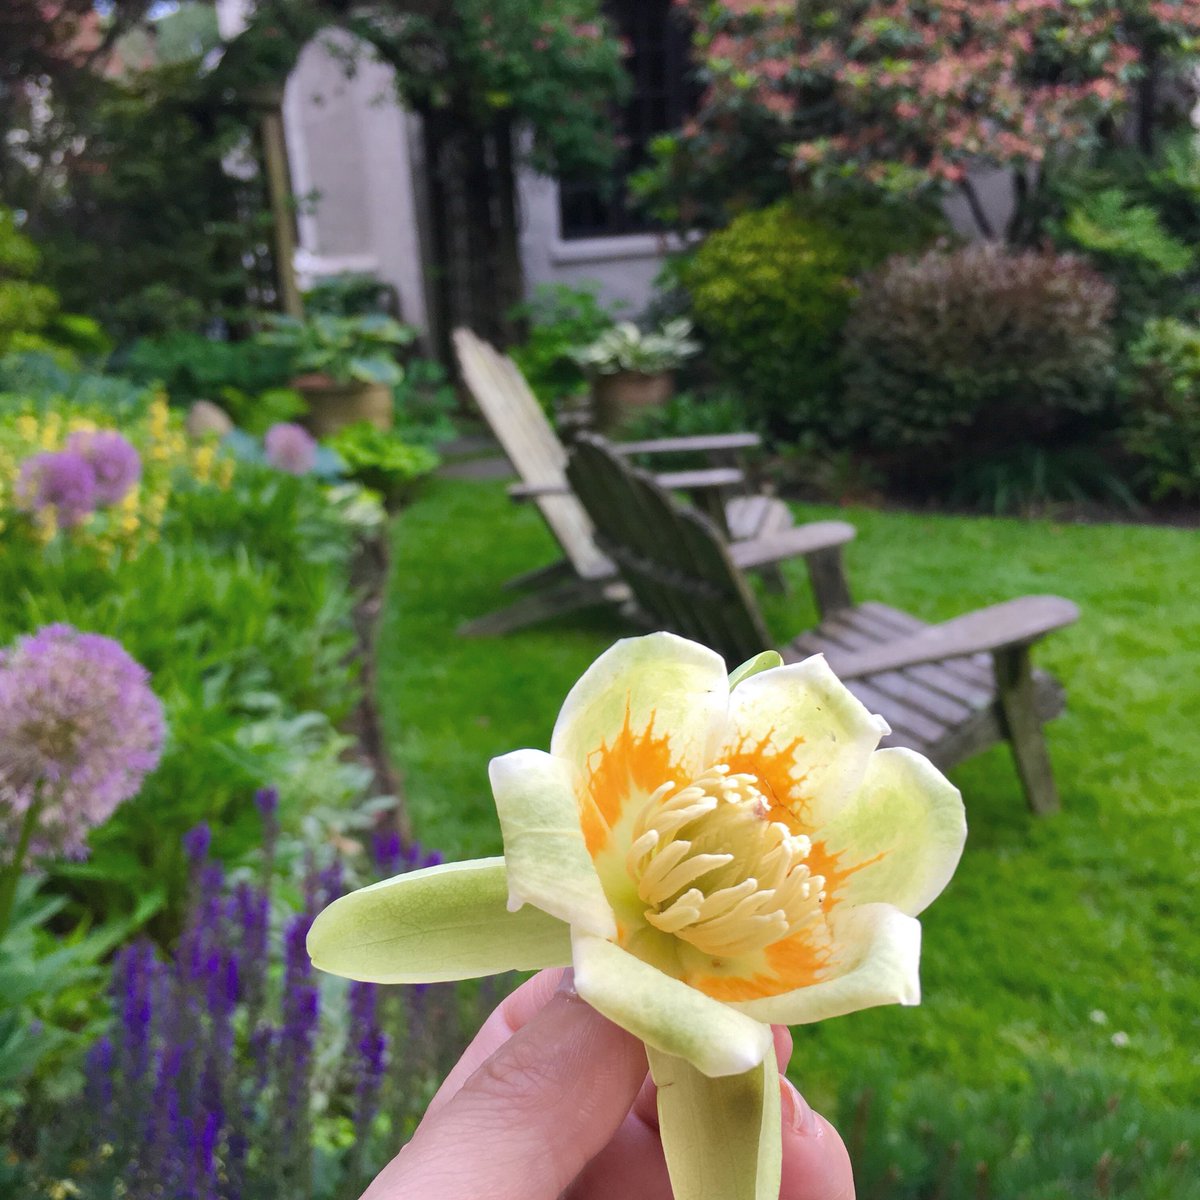 Flowers from a tulip tree. Such a short bloom. I’m a bit obsessed. #GardenParty #garden #flowers #summercolor #ForestHills #newyork #girlswhowander #sheisnotlost